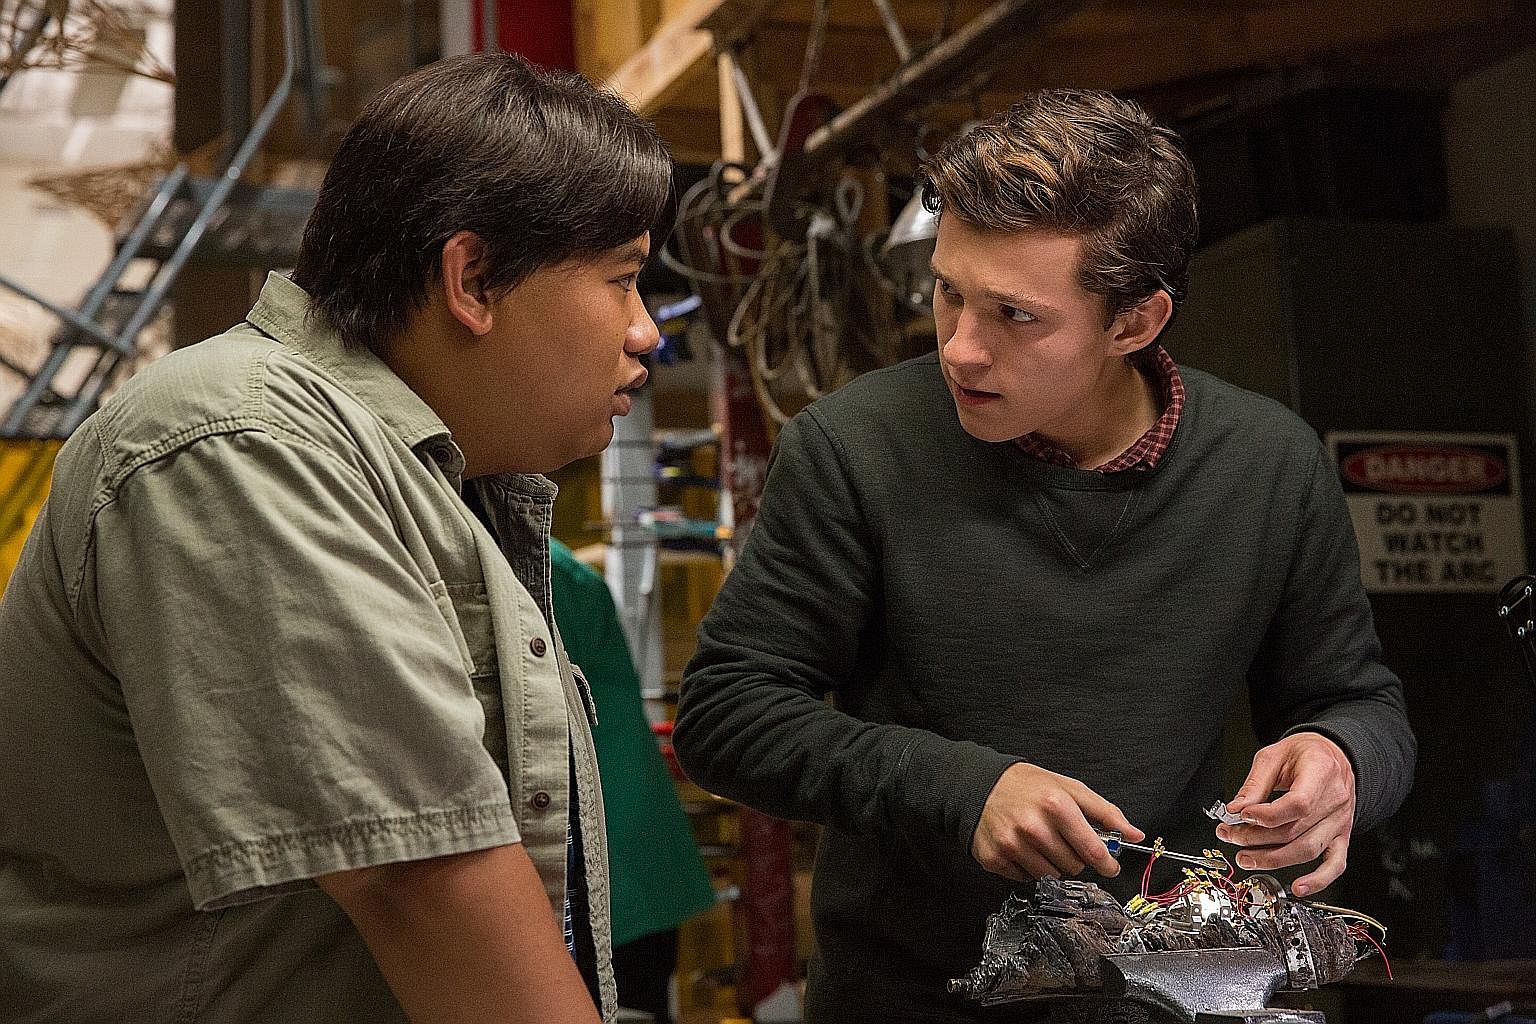 Playing the web-slinger and high school student Peter Parker in Spider-Man: Homecoming is Tom Holland (right), while Jacob Batalon stars as his best friend Ned.